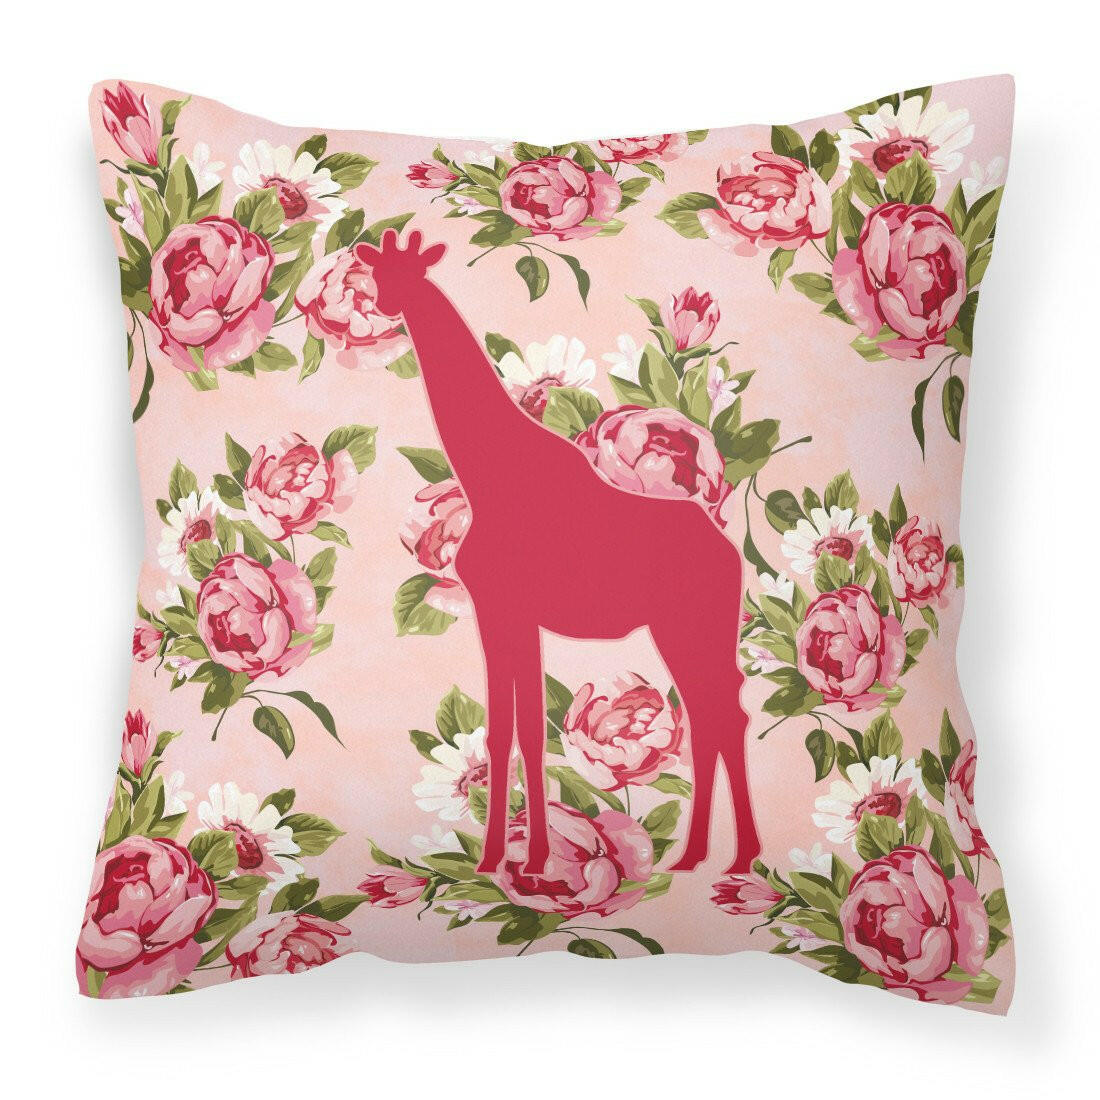 Giraffe Shabby Chic Pink Roses   Fabric Decorative Pillow BB1001-RS-PK-PW1414 - the-store.com